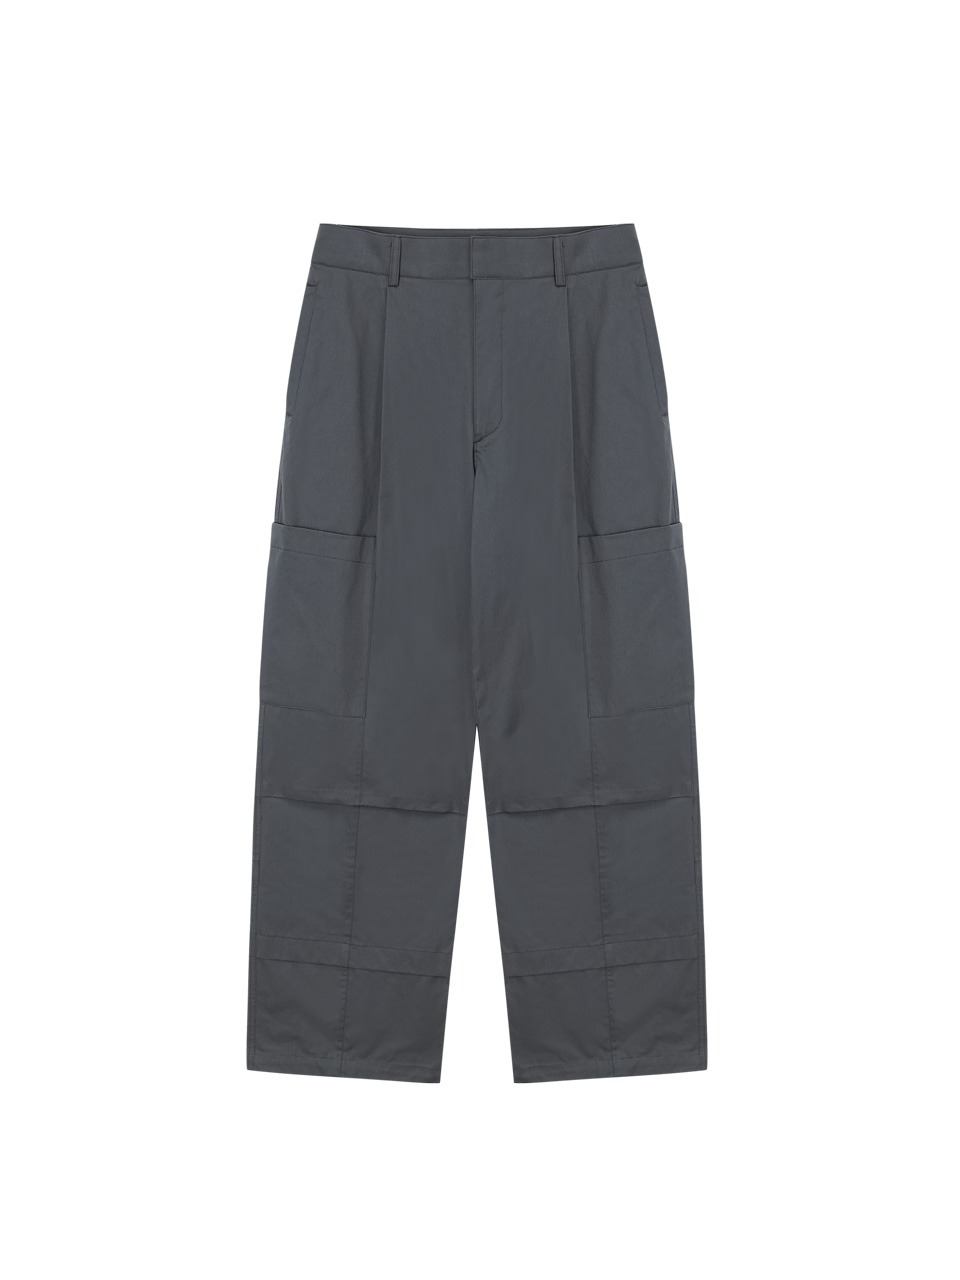 FAMILLE - SUMMER PARACHUTE WIDE CARGO PANTS (CHARCOAL)